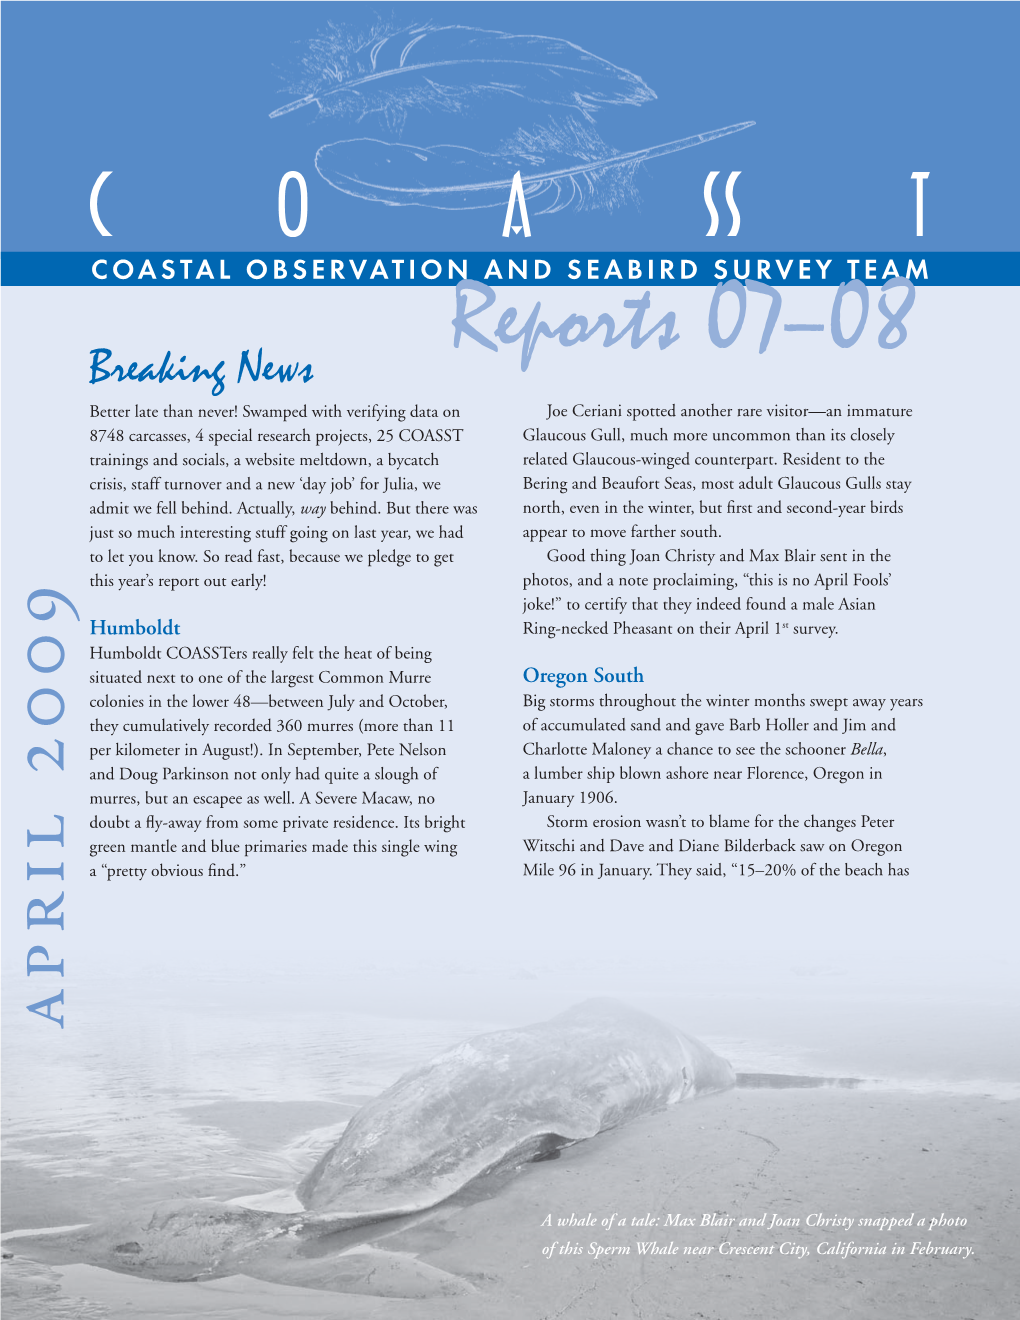 Reports 07–08